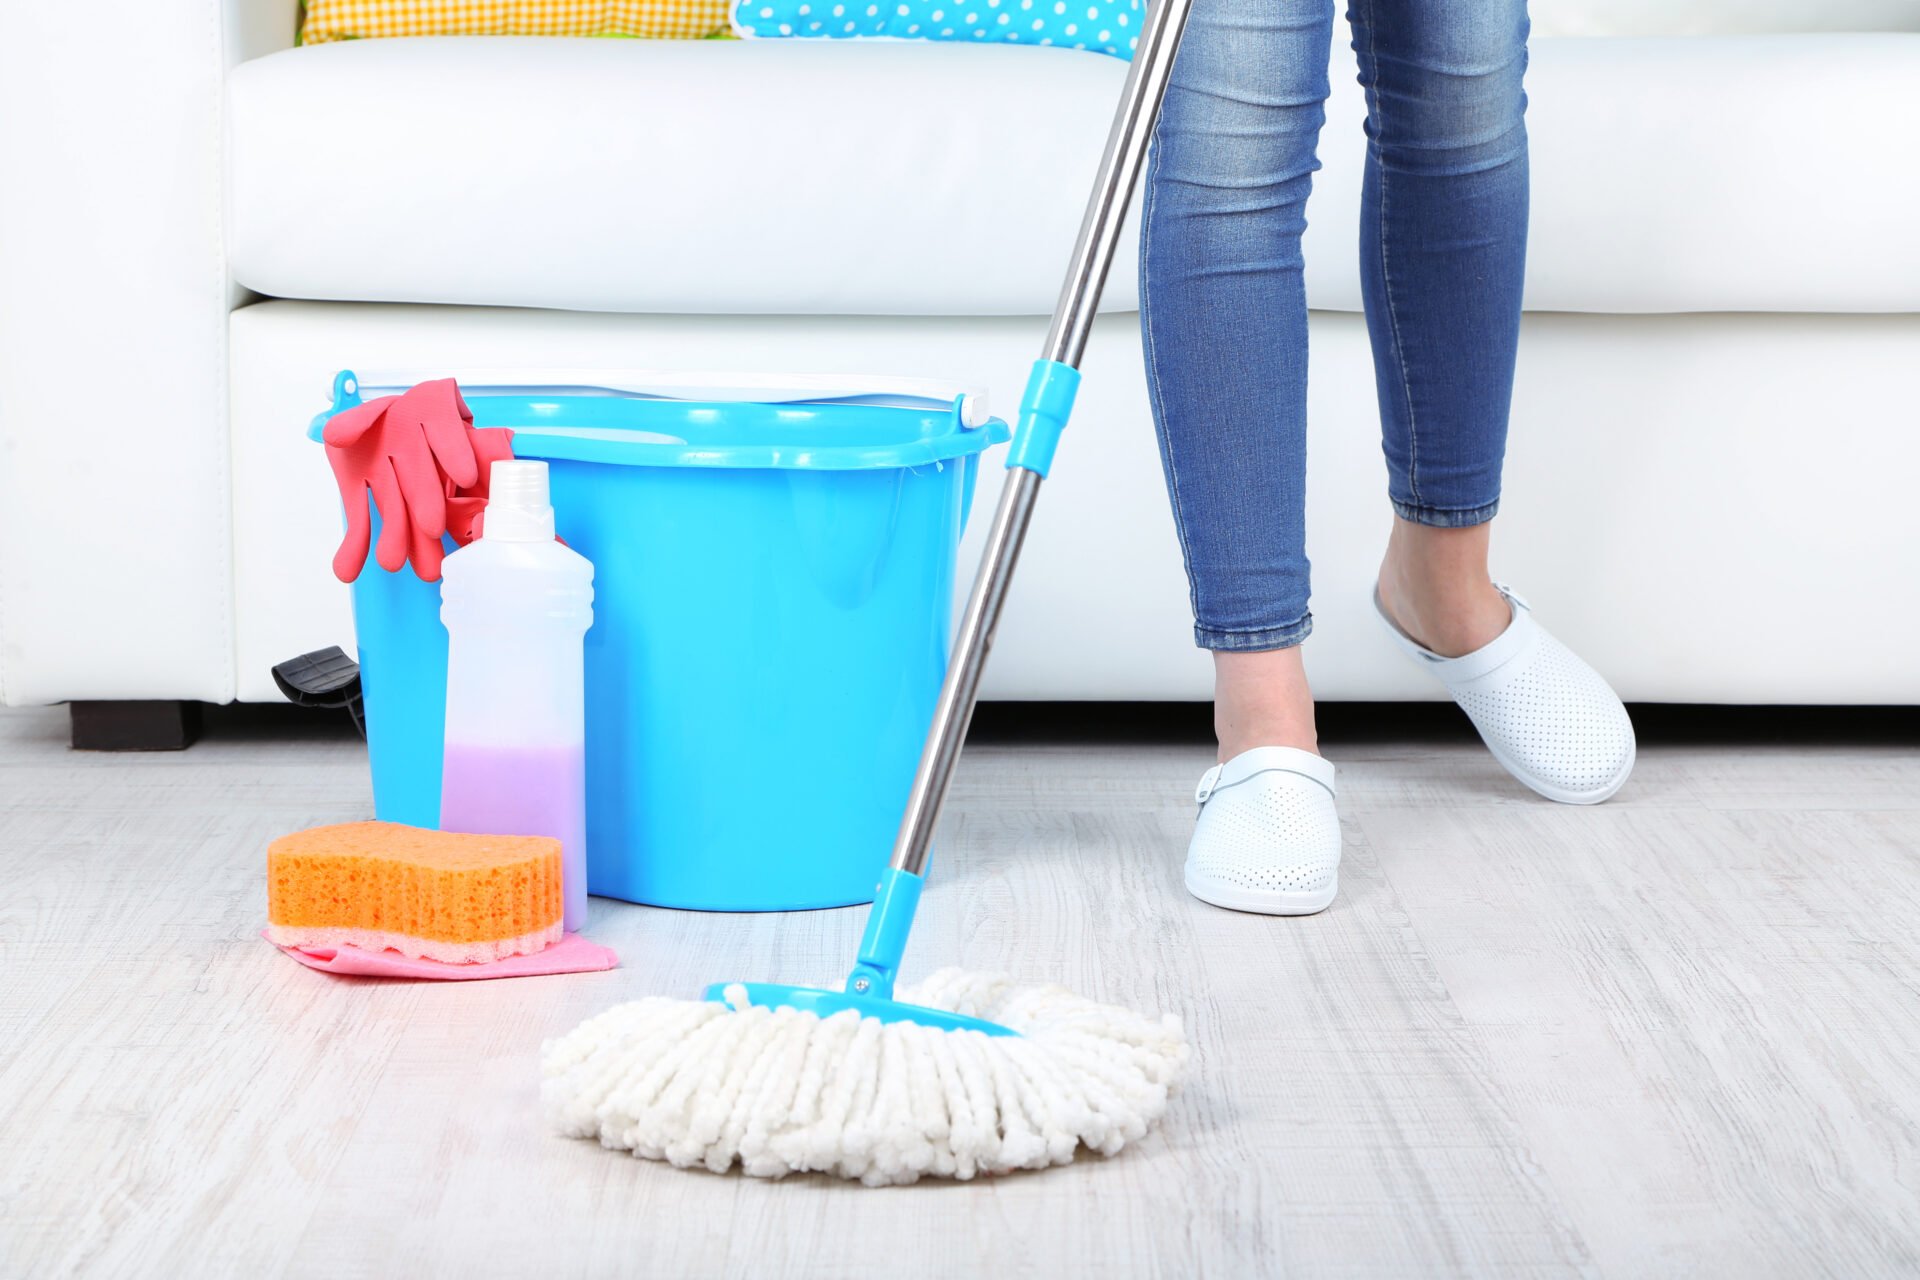 https://www.mamavation.com/wp-content/uploads/2022/09/safest-non-toxic-floor-cleaners-for-indoor-air-quality-planet-5.jpg